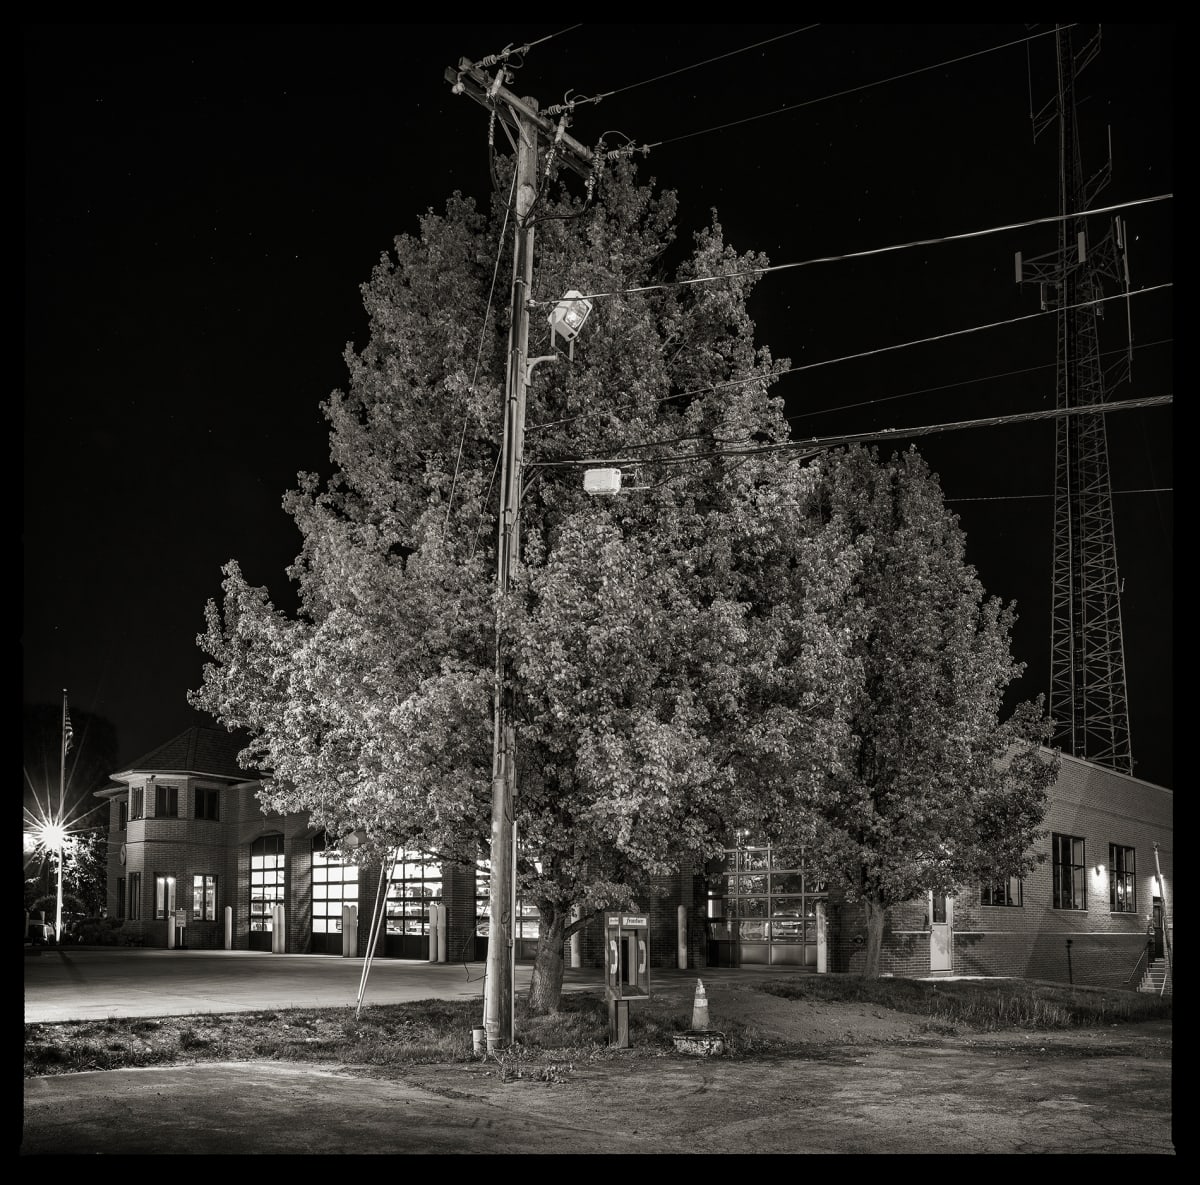 Unknown Number – Brighton Fire Department, 3100 East Avenue, Brighton, NY 14610 by Eric T. Kunsman  Image: ID: A black and white image shows a group of trees at night.  Behind the trees is a building that is lit up.  Under the closest tree is a payphone.  